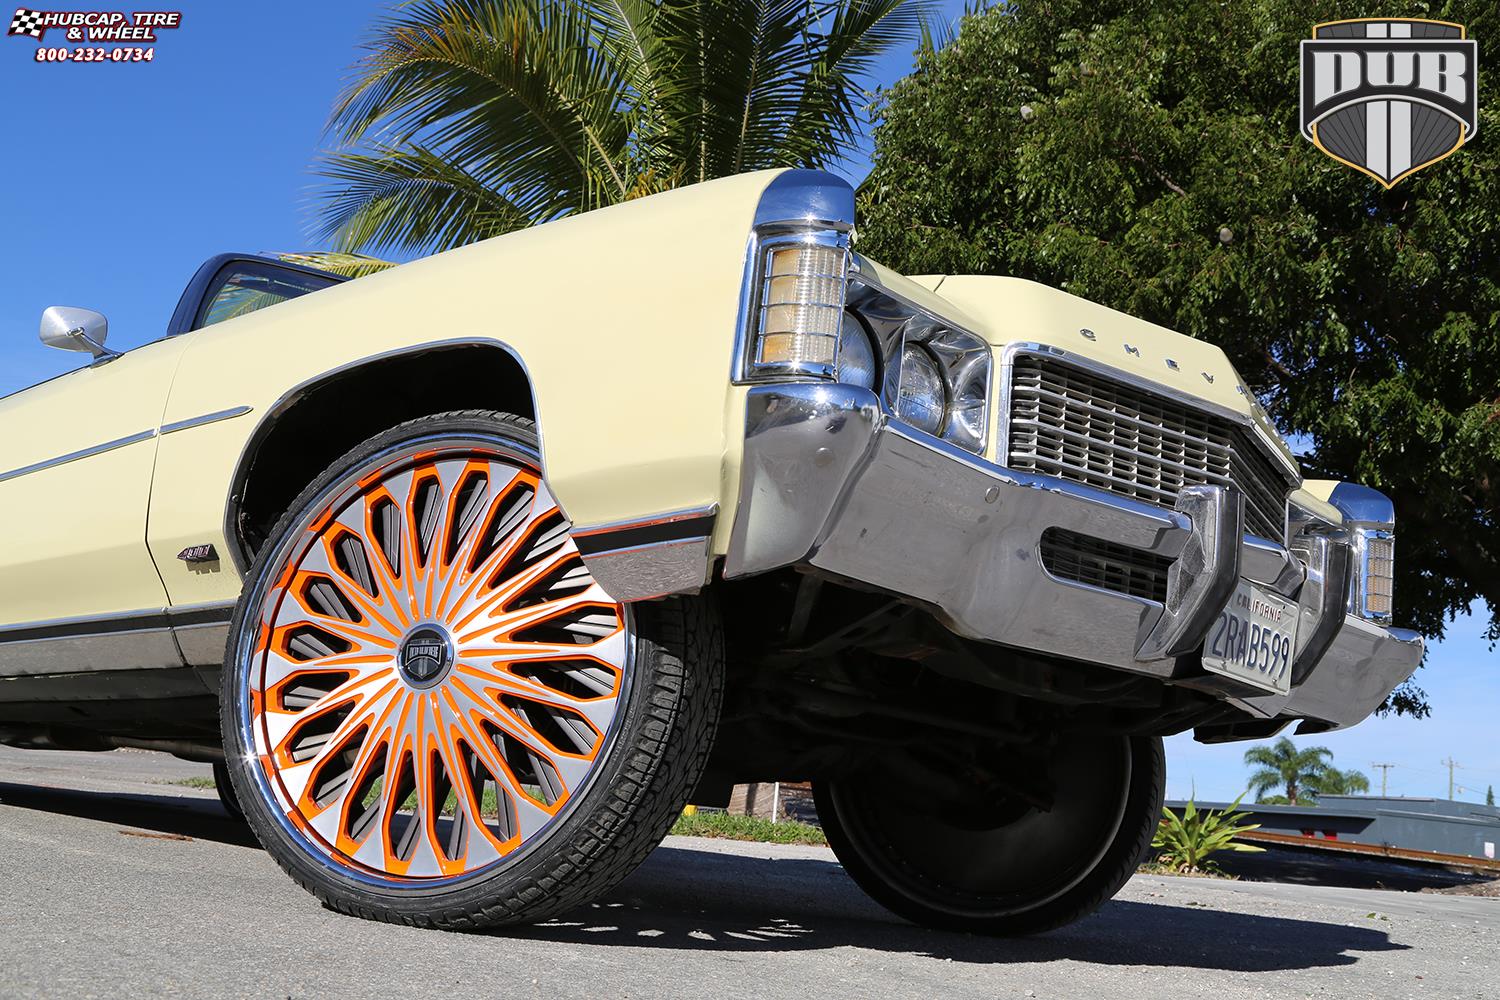 vehicle gallery/chevrolet impala dub s718 fate 26X9  Orange & Milled wheels and rims